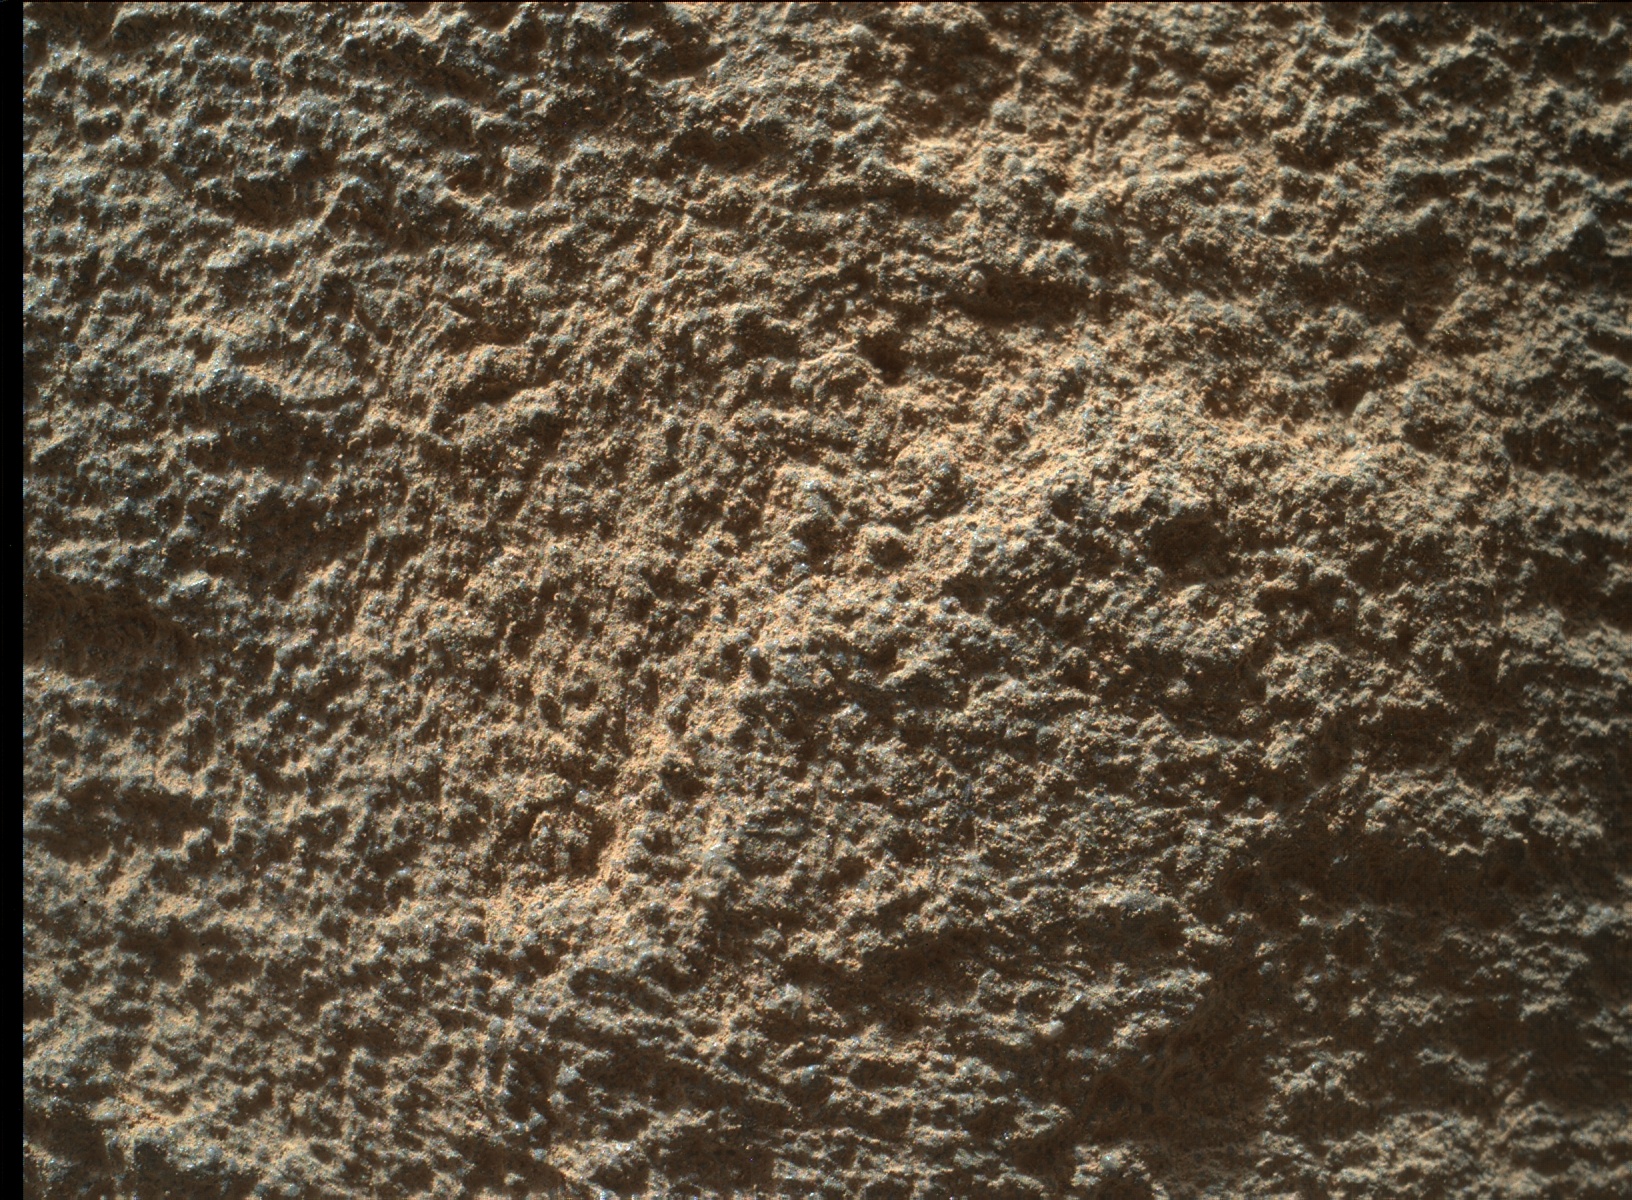 Nasa's Mars rover Curiosity acquired this image using its Mars Hand Lens Imager (MAHLI) on Sol 1293